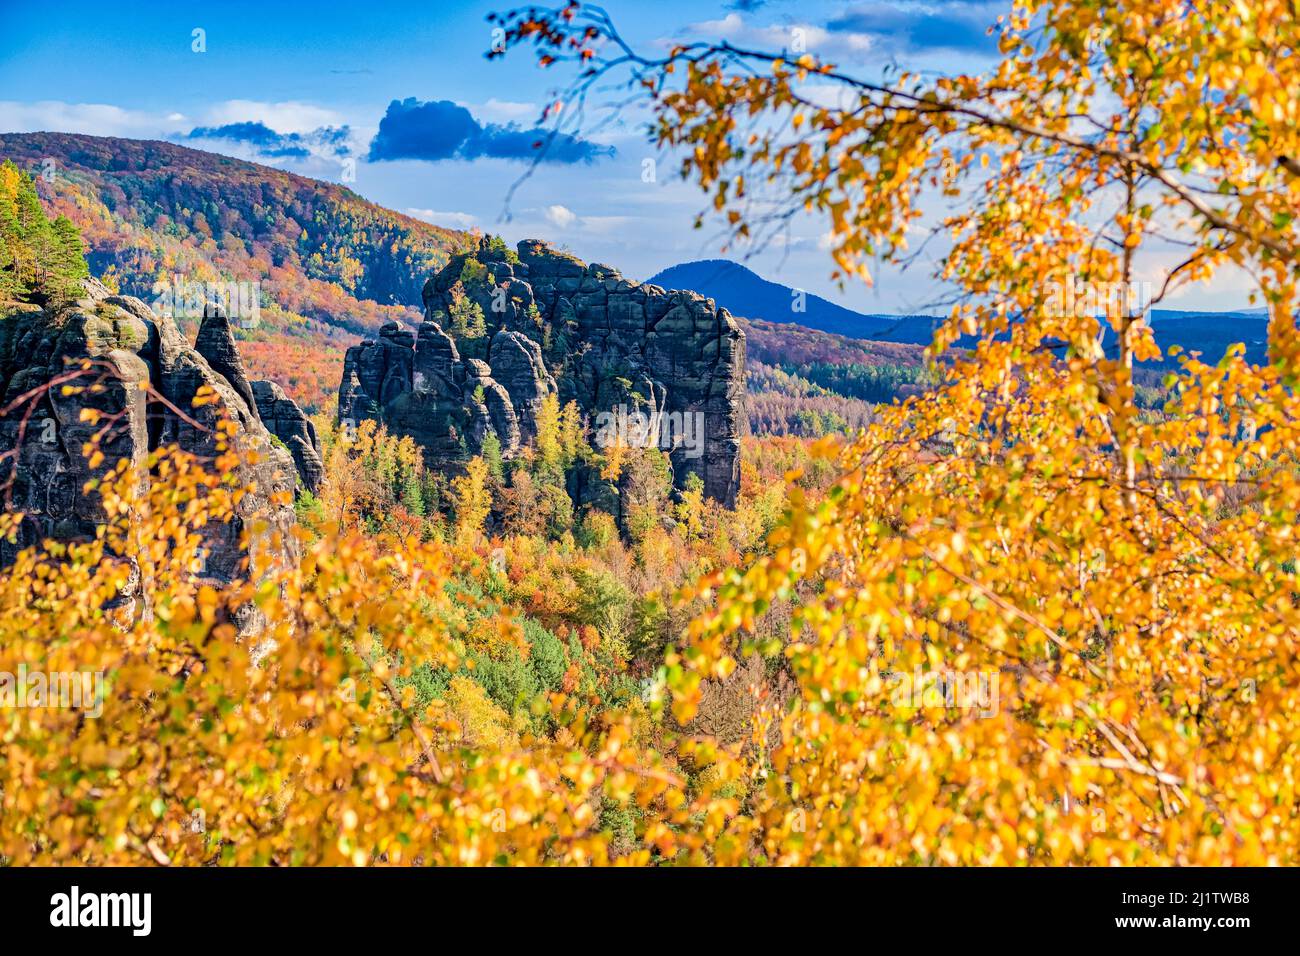 Landscape with rock formations, colorful trees and the summit Rauschenstein in Schmilka area of the Saxon Switzerland National Park in autumn. Stock Photo